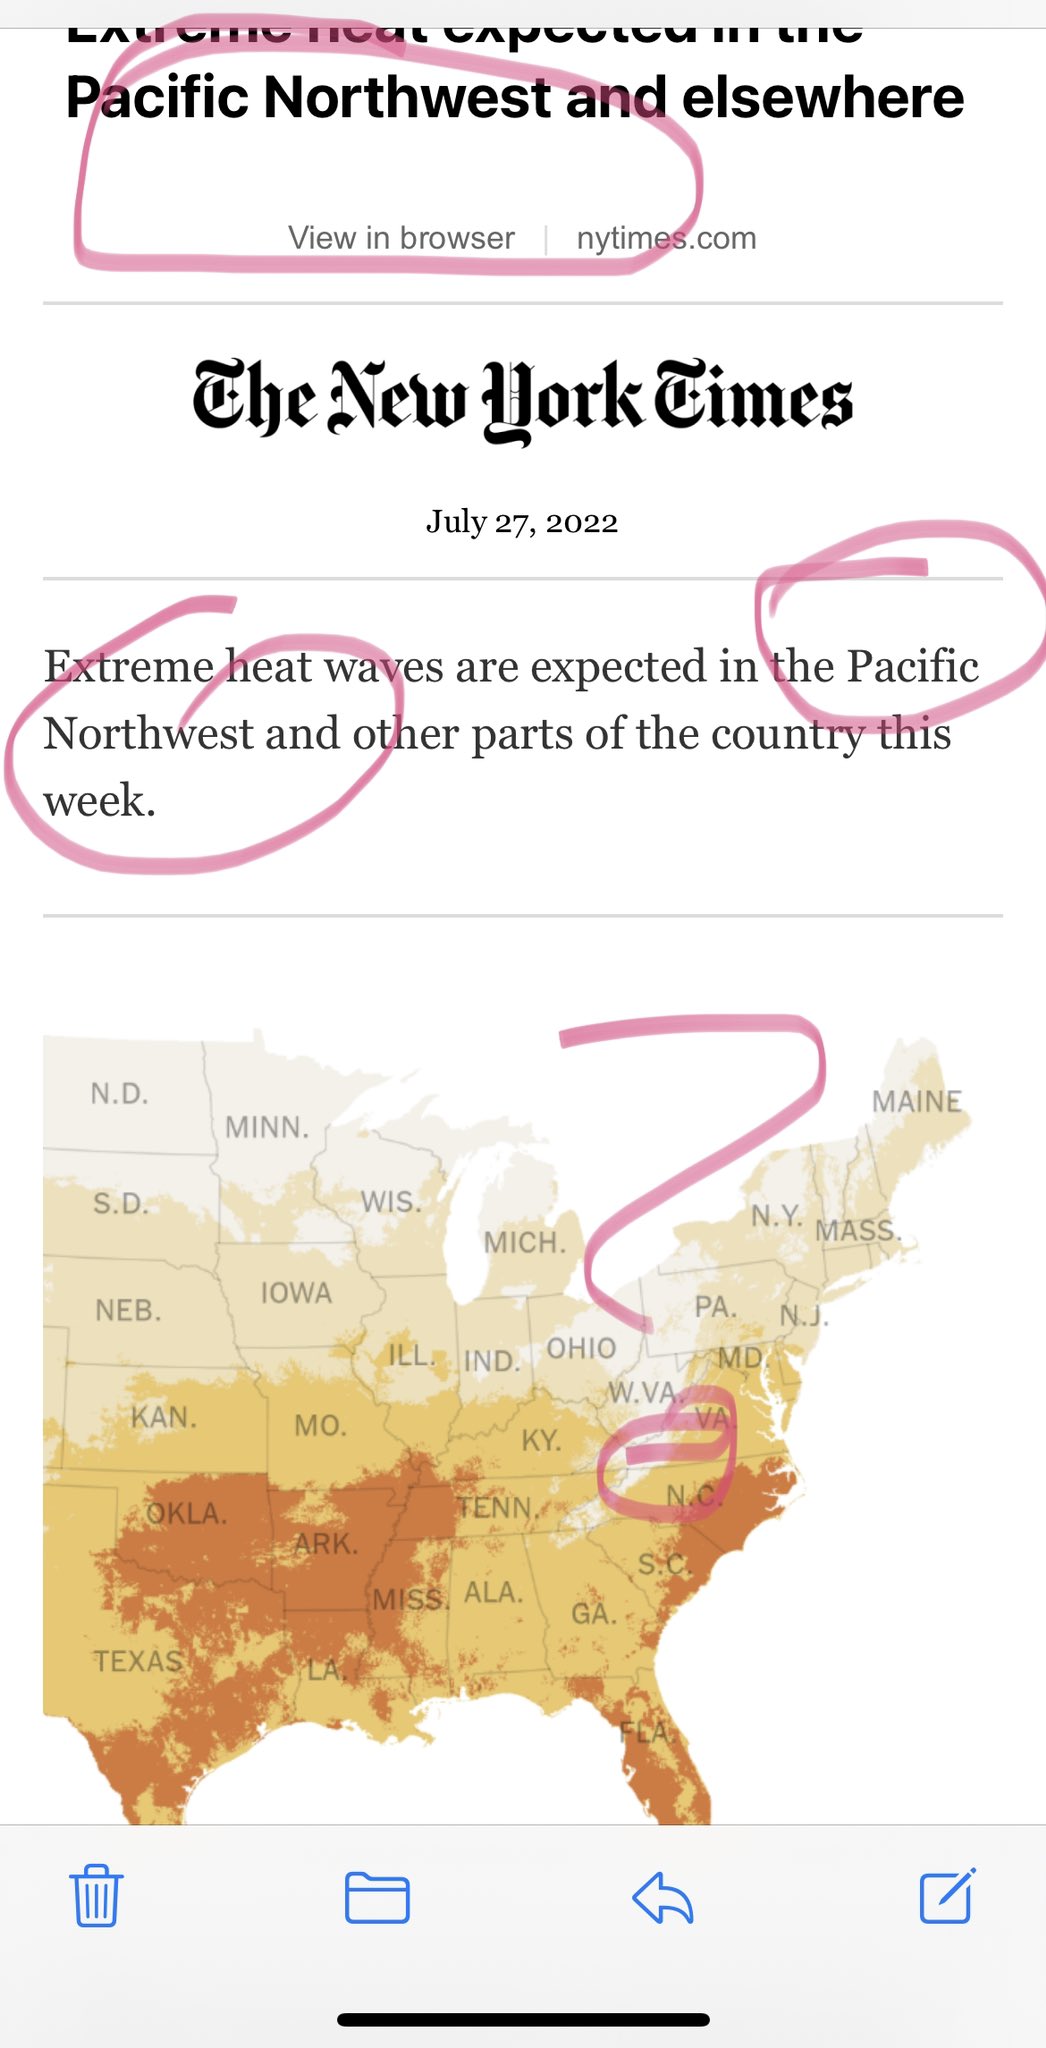 NYT headline saying heatwaves in PNW, with a map of the East coast. I have highlighted the discrepancy